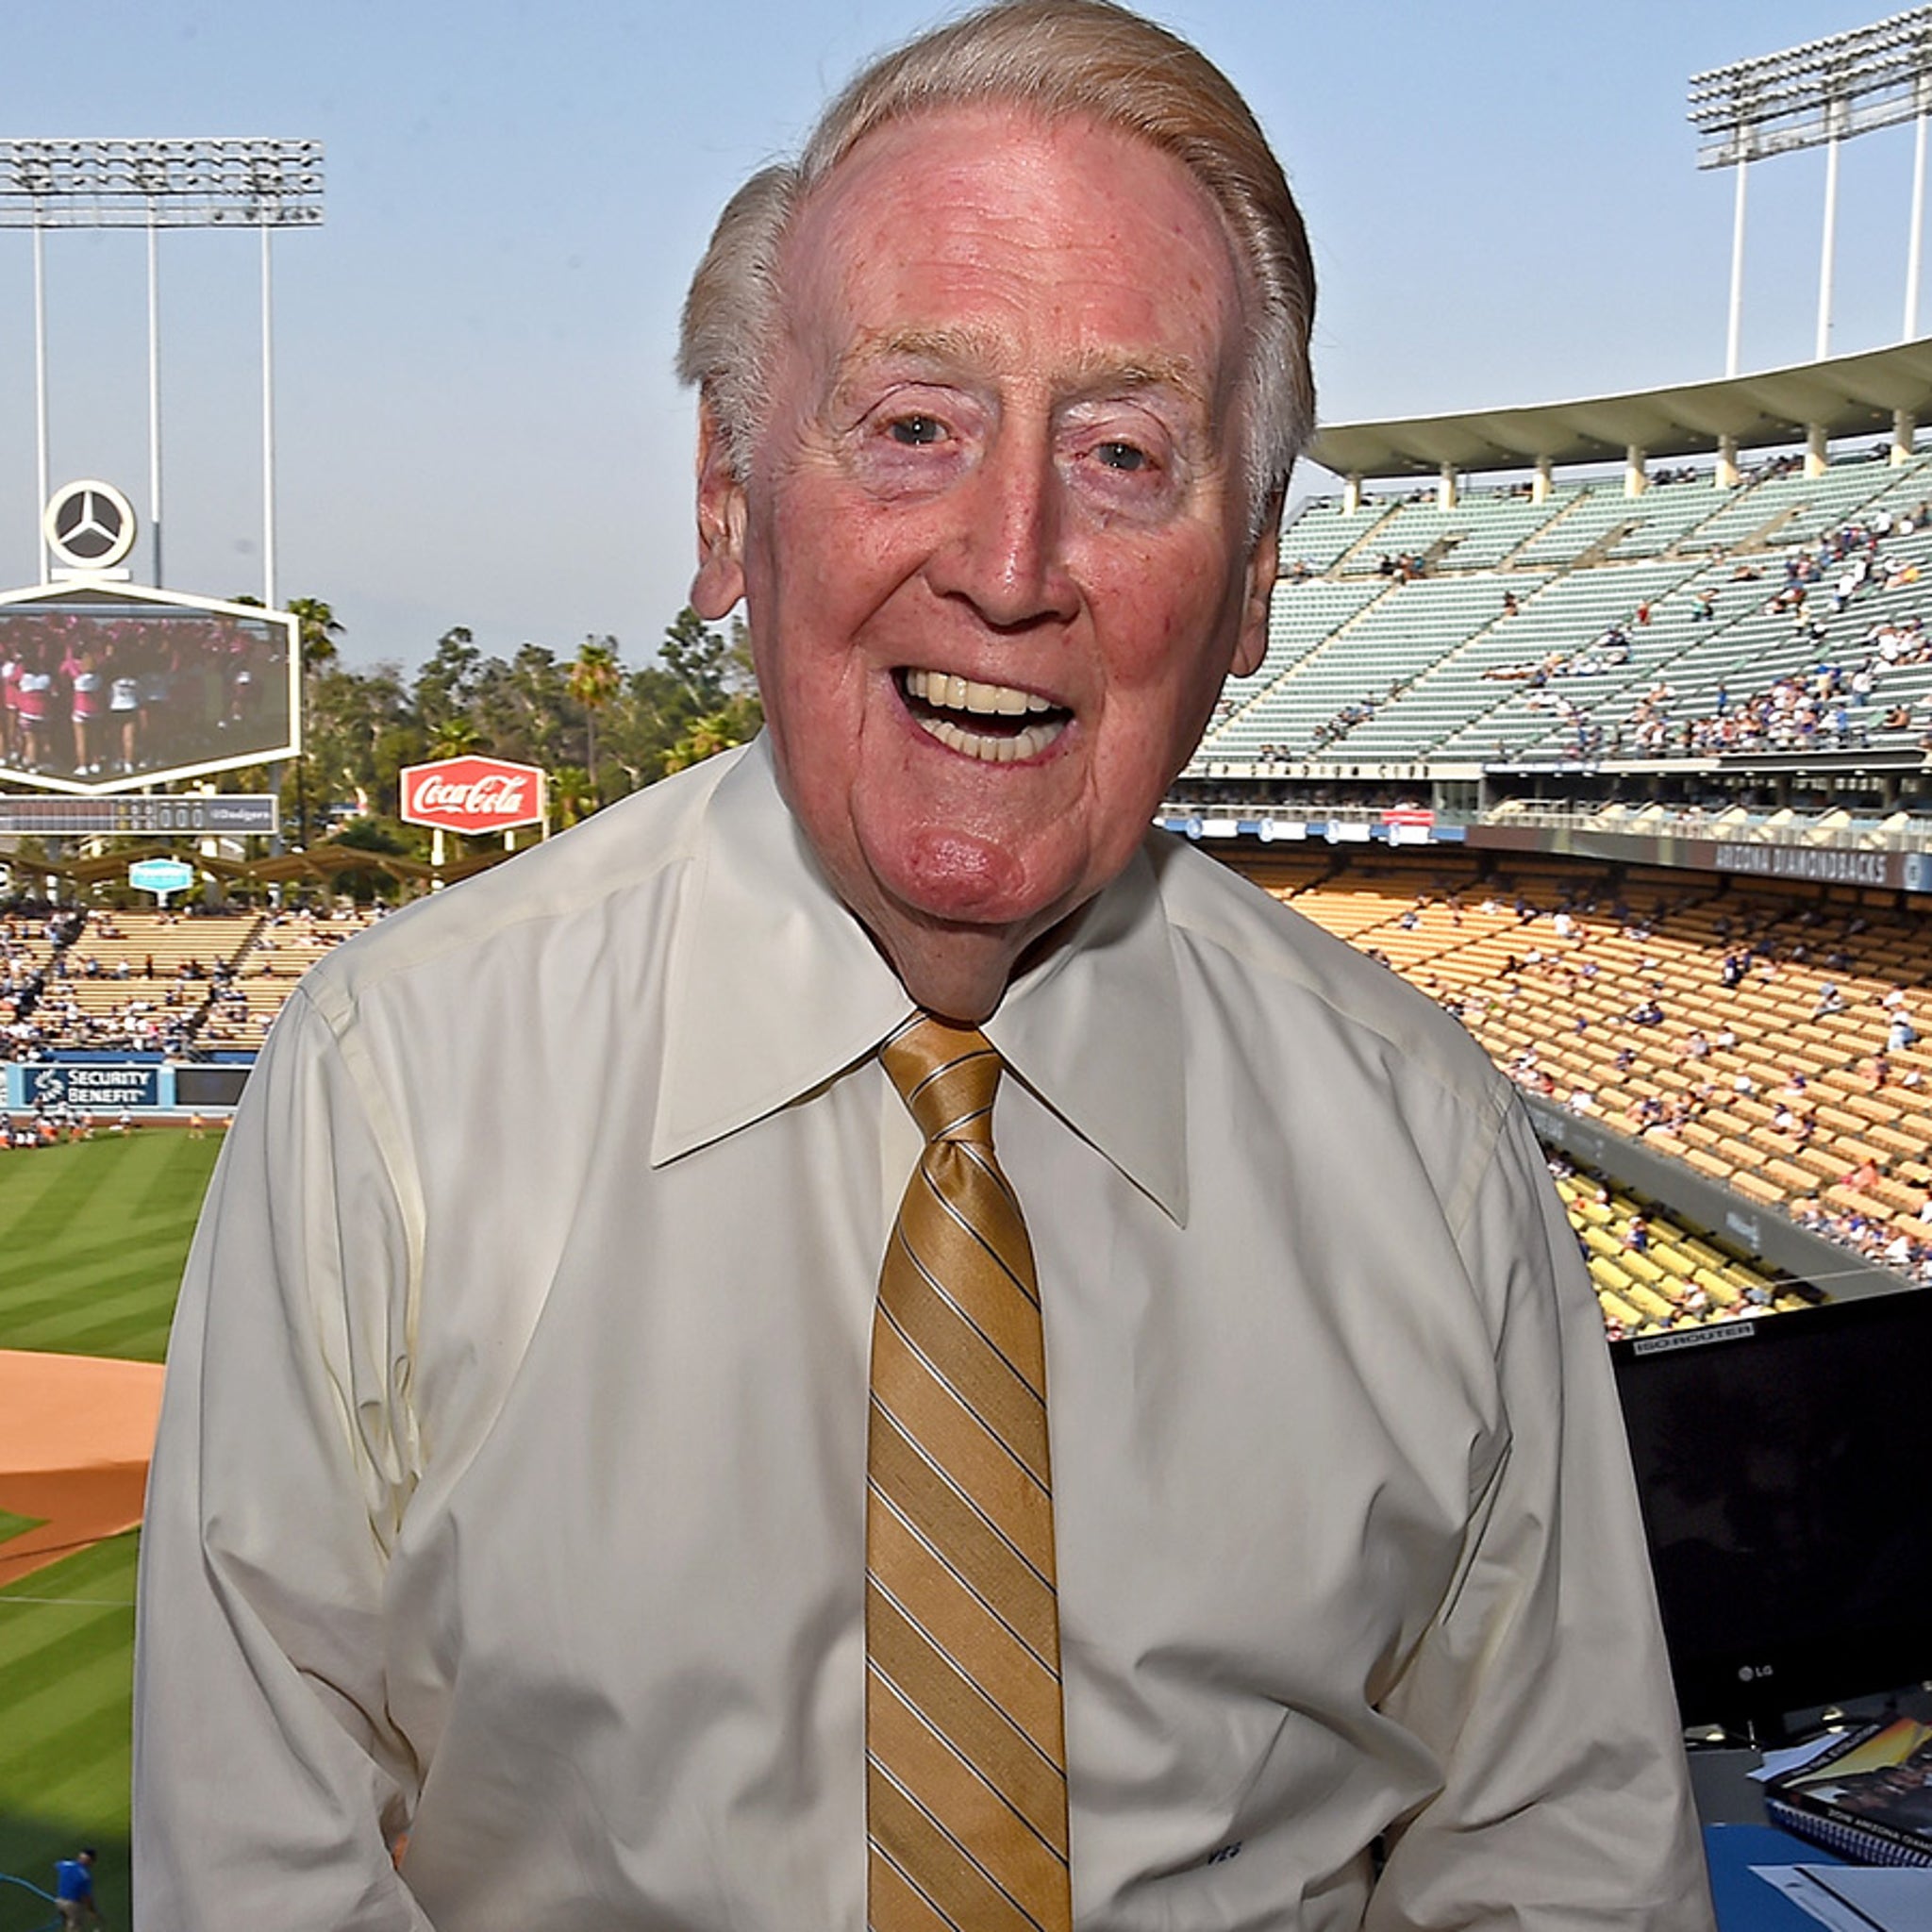 RIP Vin Scully MLB and Los Angeles Dodgers Broadcasting Legend T